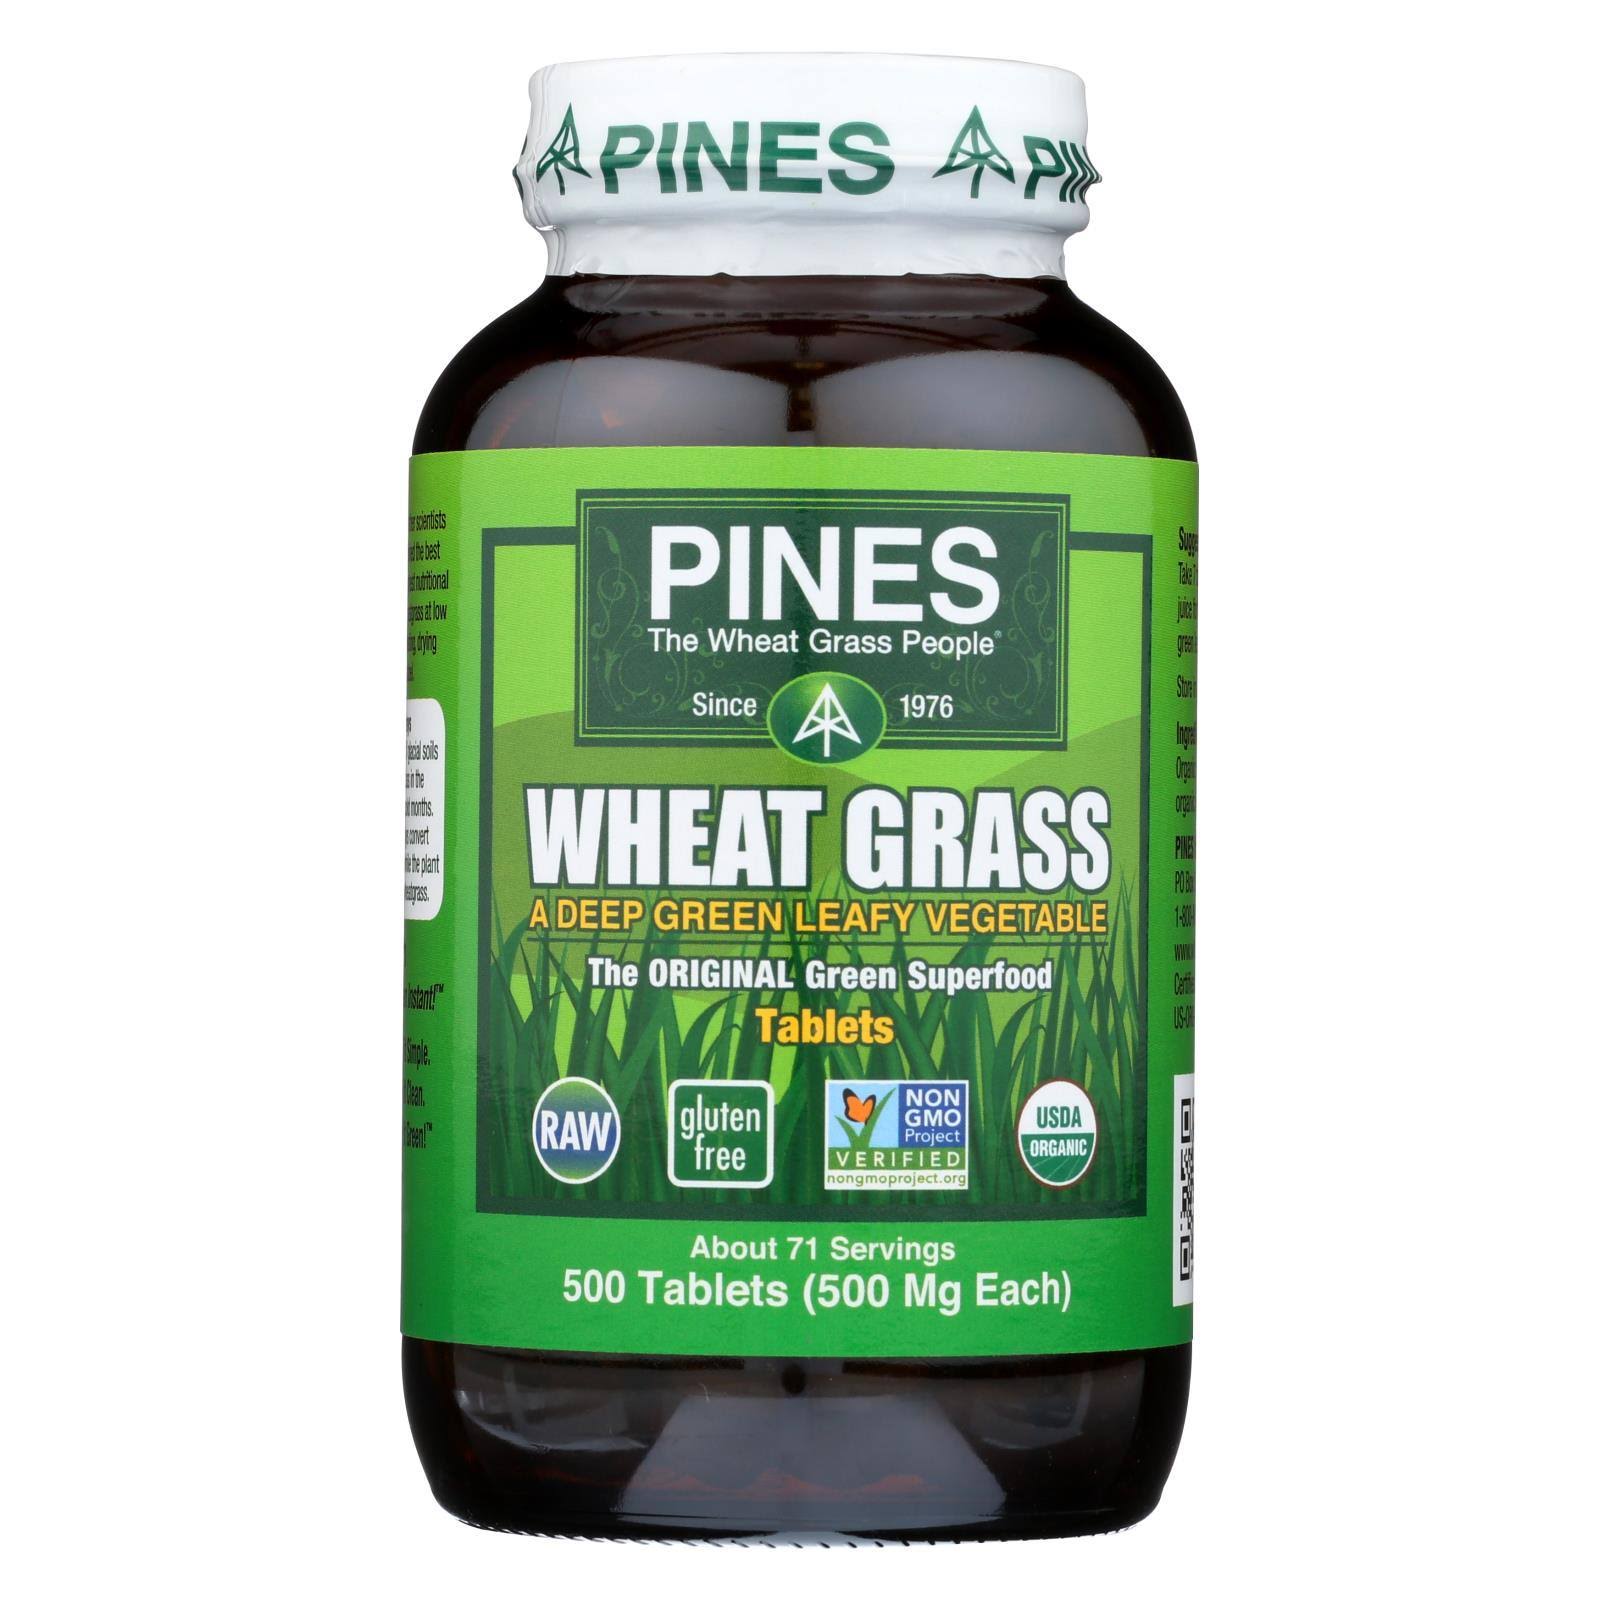 The Wheat Grass People Pines Wheat Grass Tablets